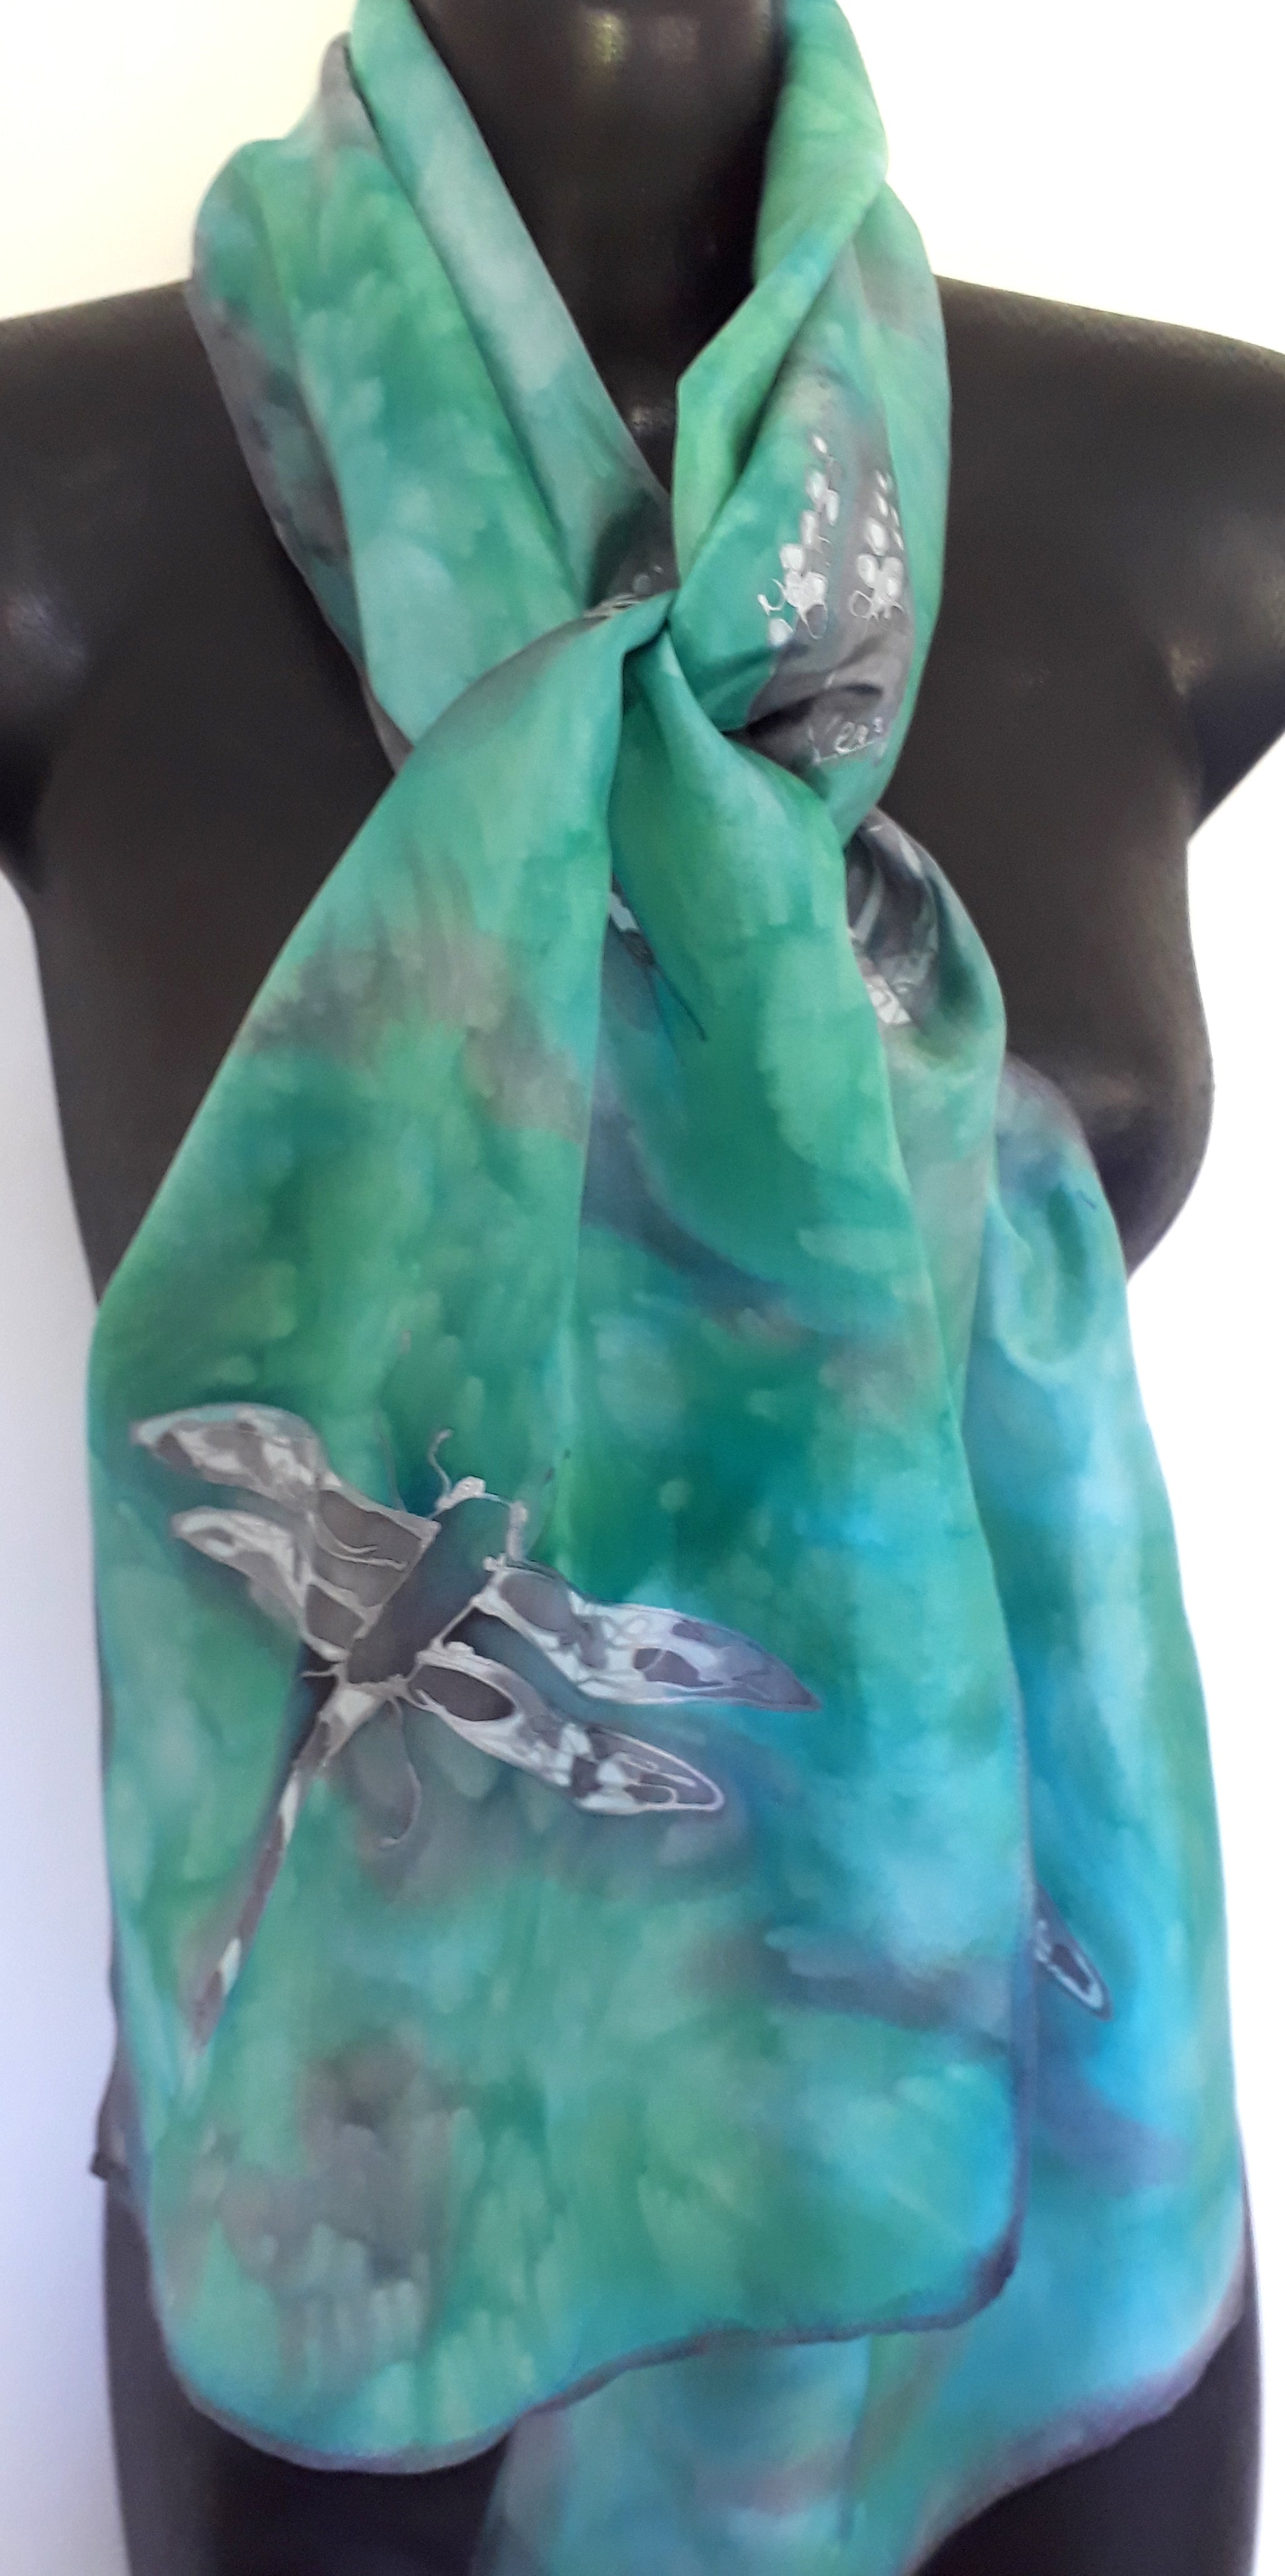 Dragonflies Mint and Sea Green - Hand painted Silk Scarf - Satherley Silks NZ